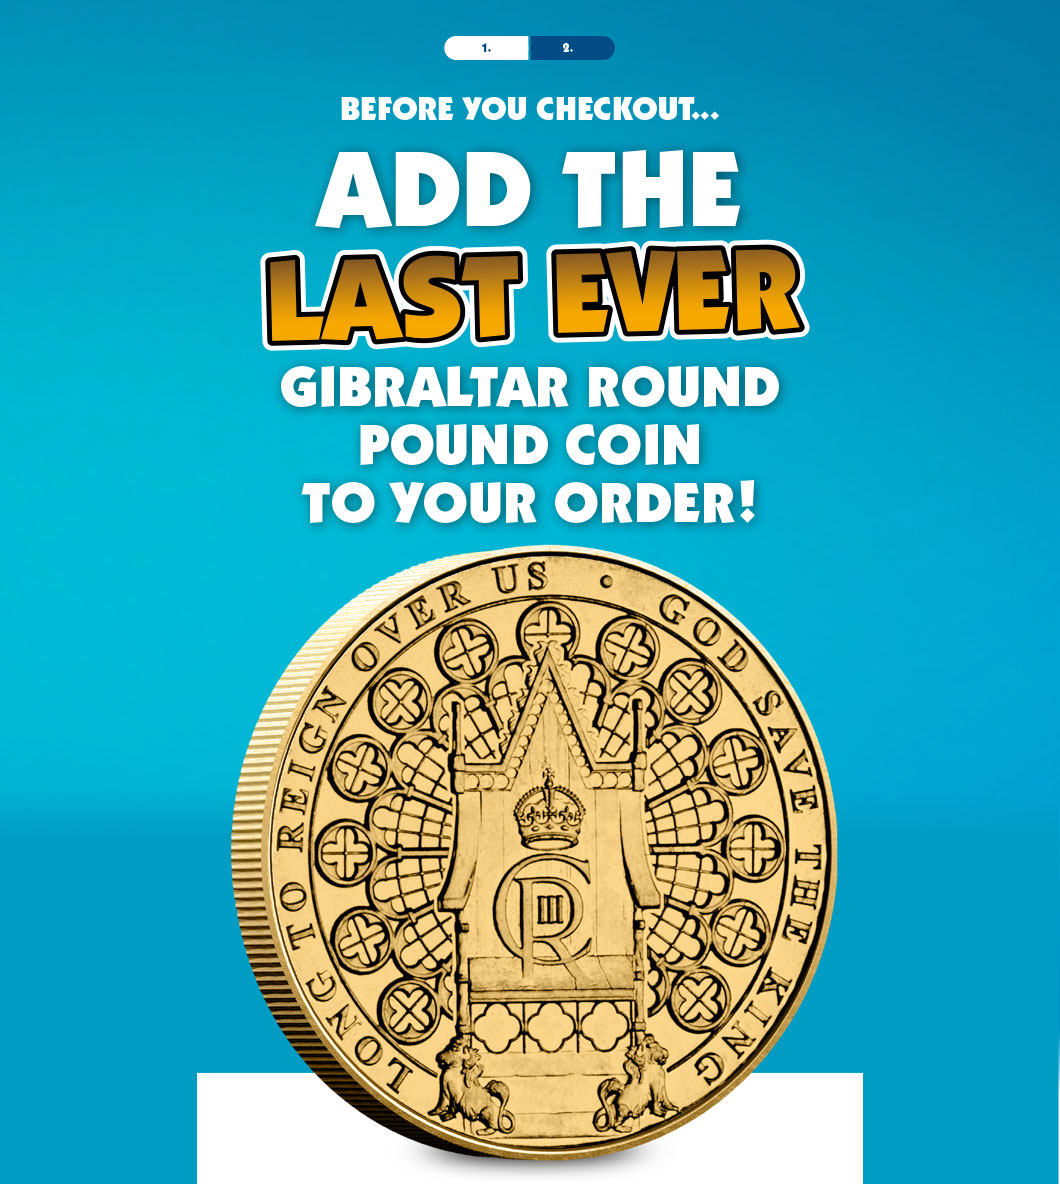 DESKTOP - Before you checkout... Add the last ever Gibraltar round pound coin to your order!